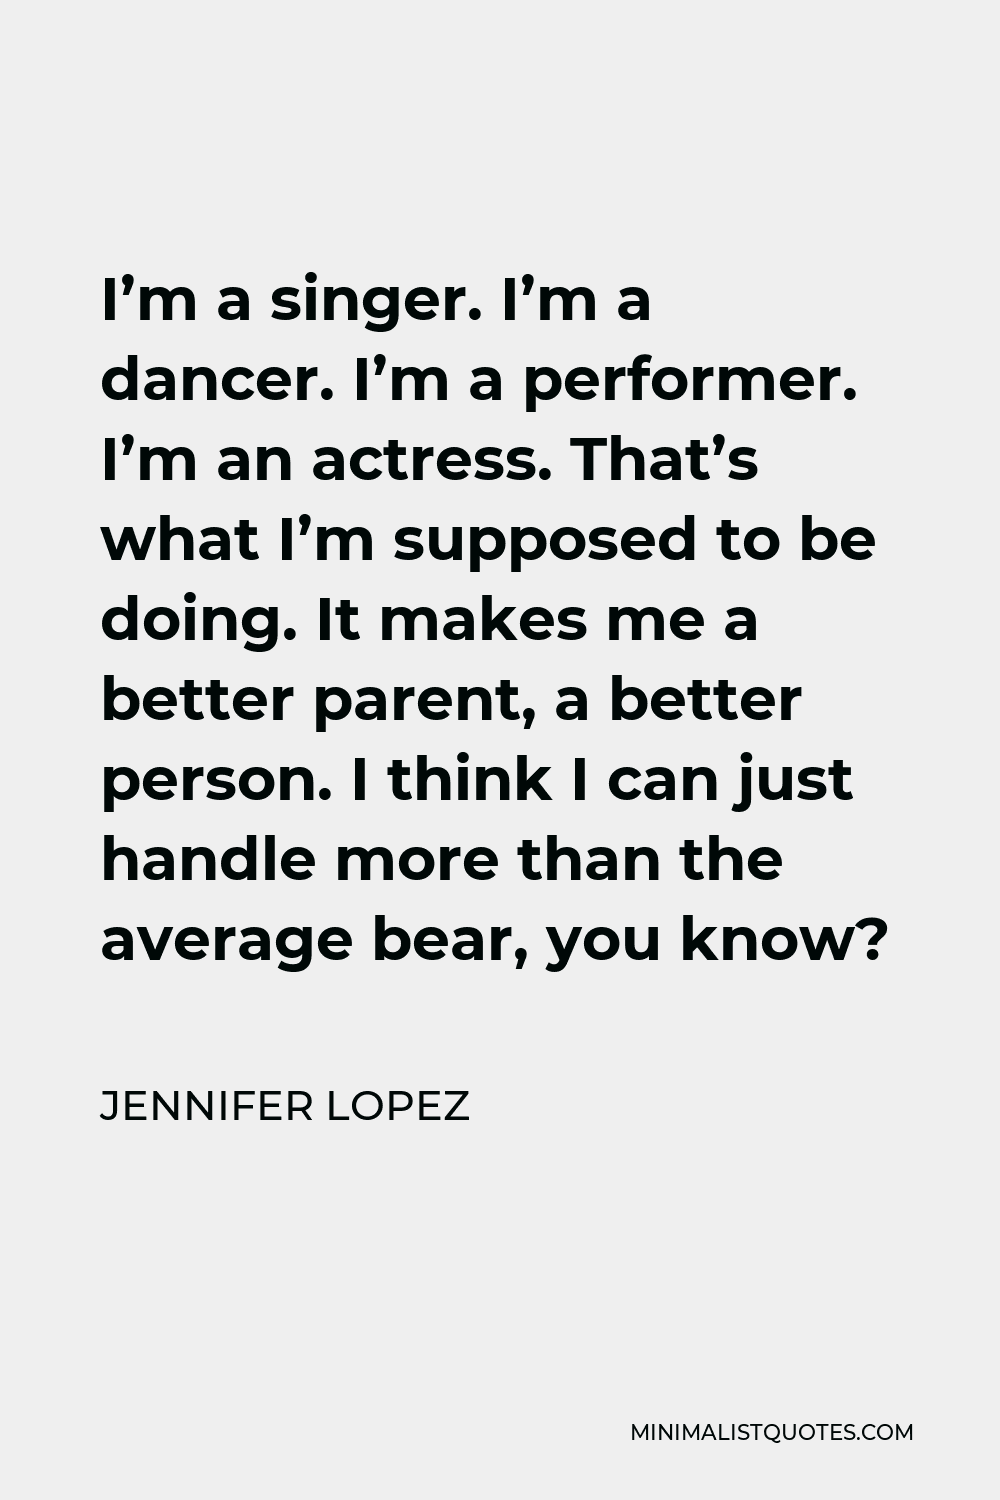 Jennifer Lopez Quote - I’m a singer. I’m a dancer. I’m a performer. I’m an actress. That’s what I’m supposed to be doing. It makes me a better parent, a better person. I think I can just handle more than the average bear, you know?